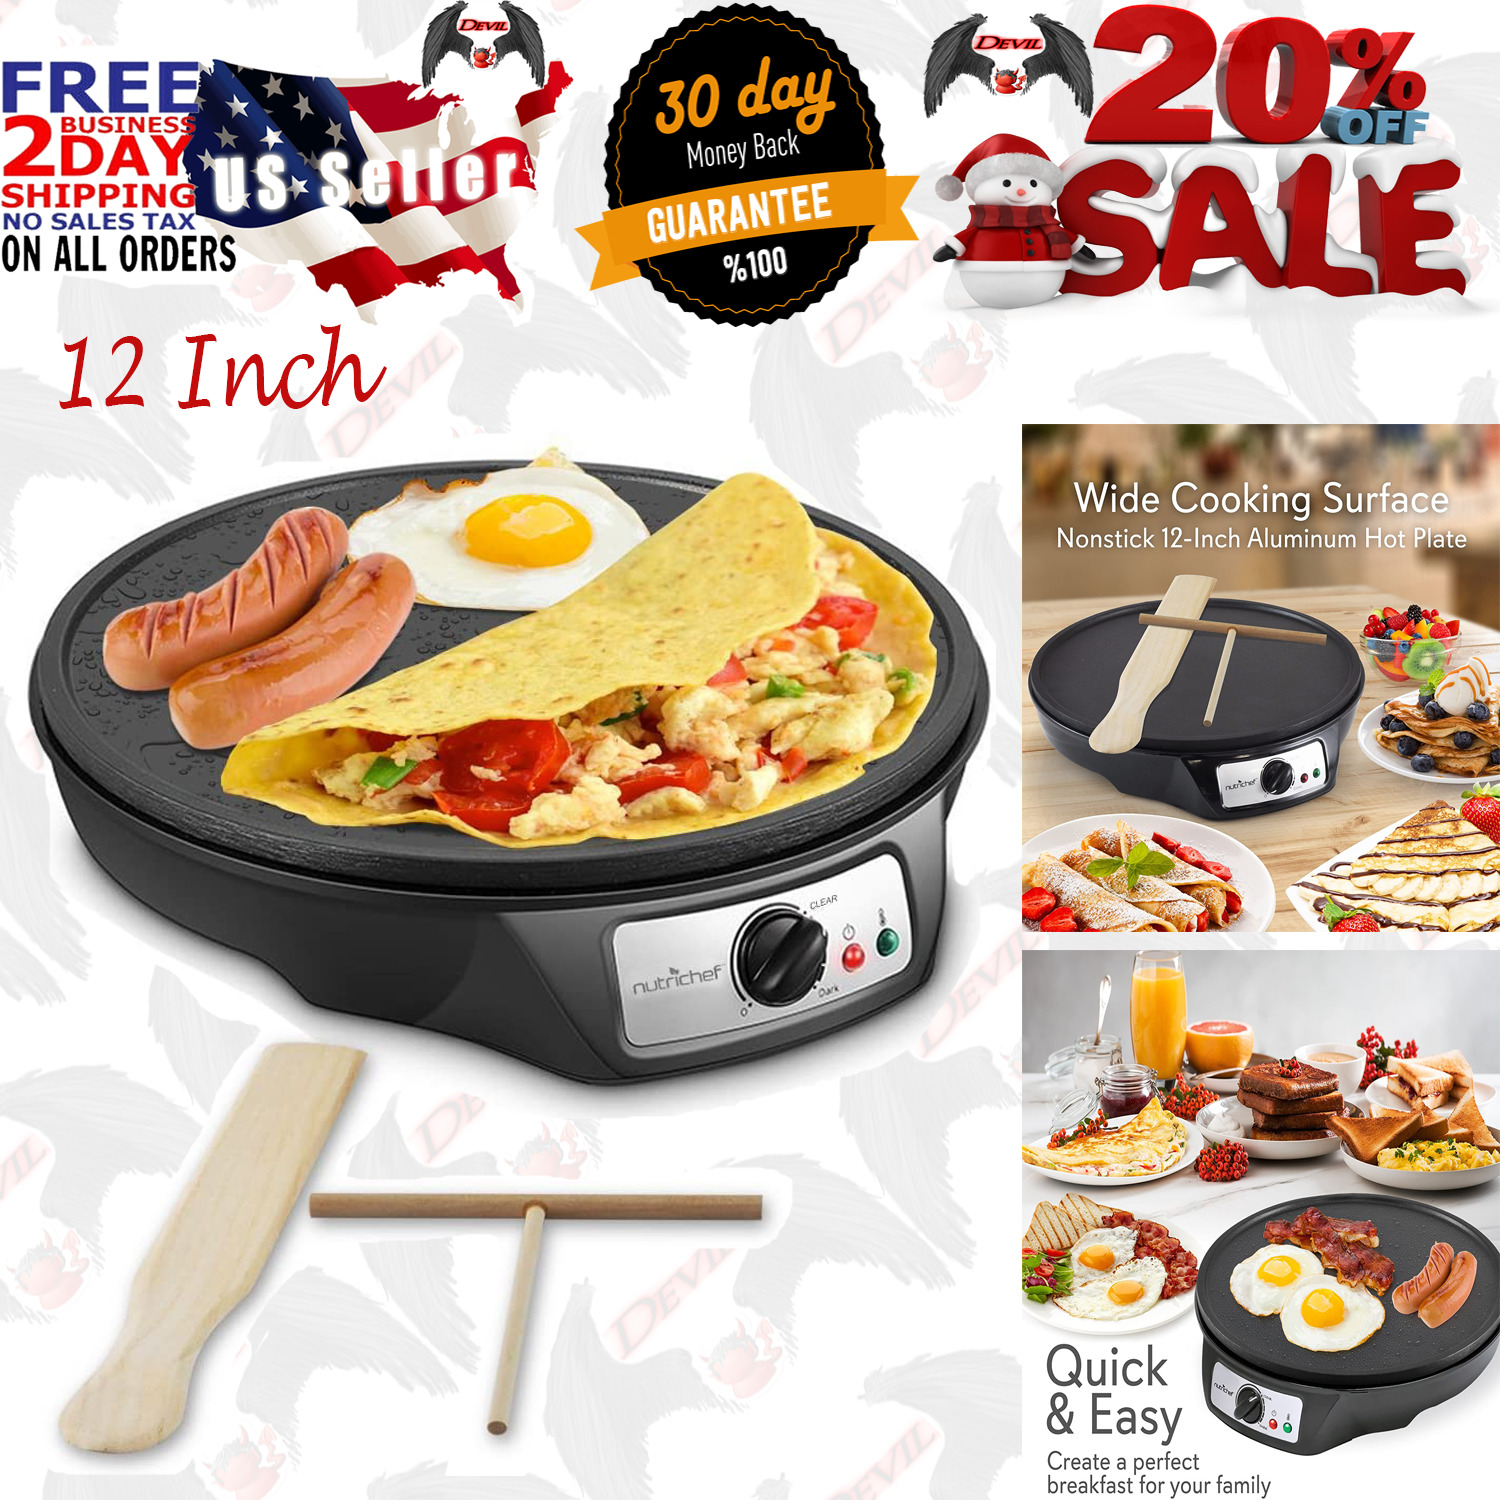 12 Inch Electric Griddle Crepe Maker Cooktop Nonstick Quick Easy Breakfast